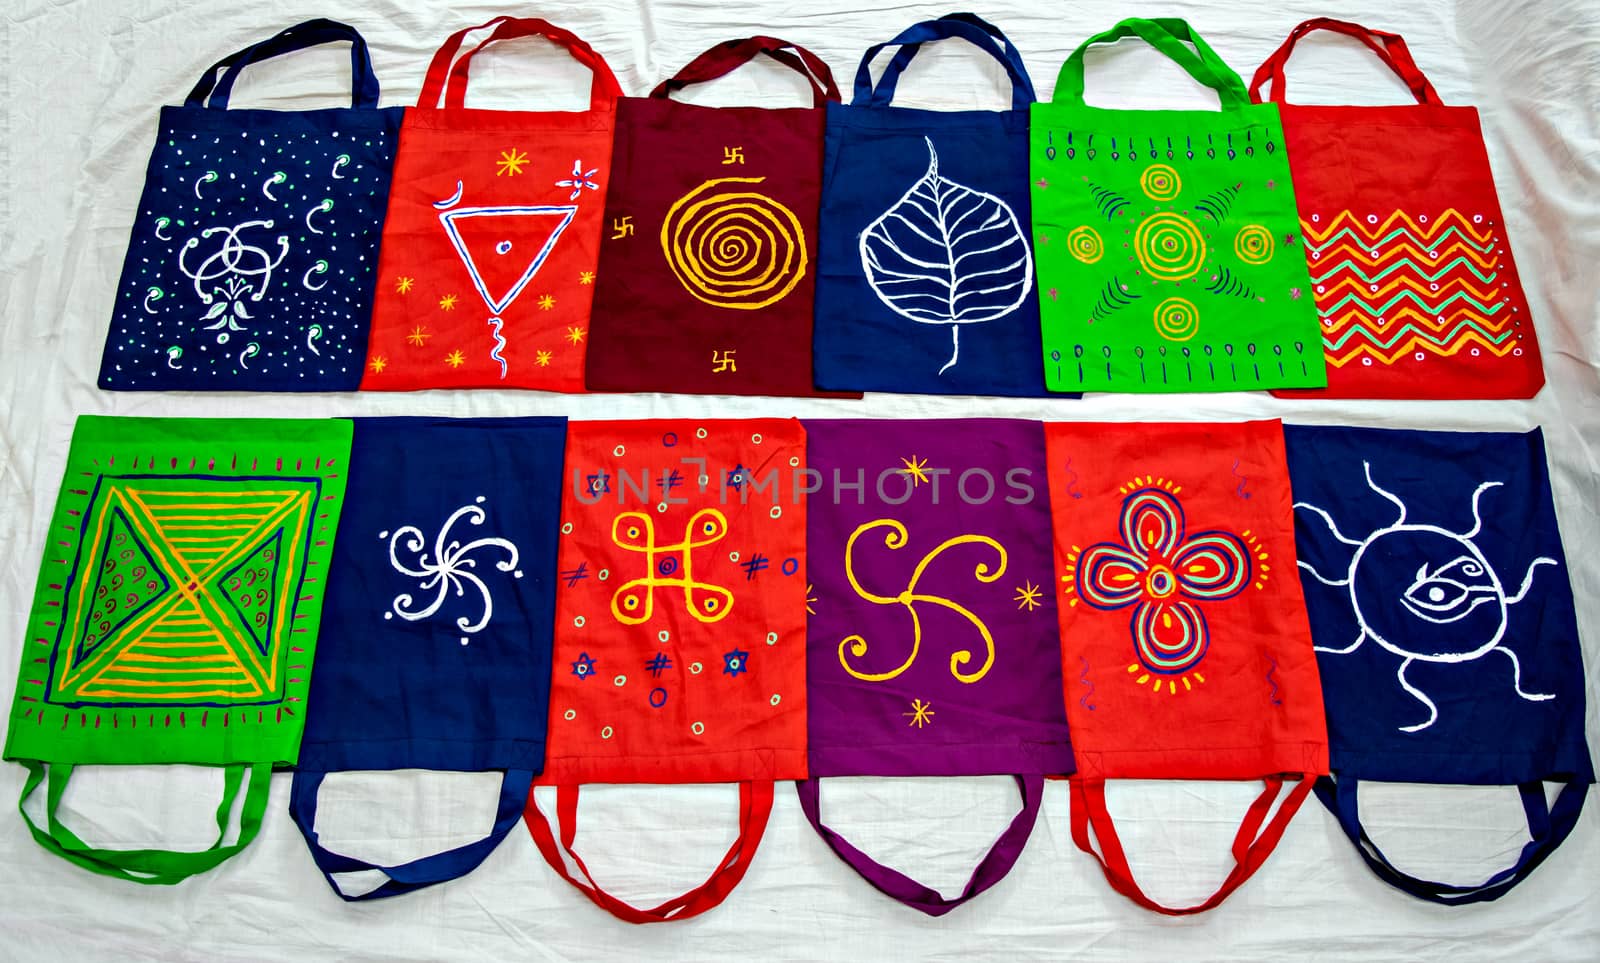 Colorful cotton bags with hand painted symbols arranged in pattern. by lalam